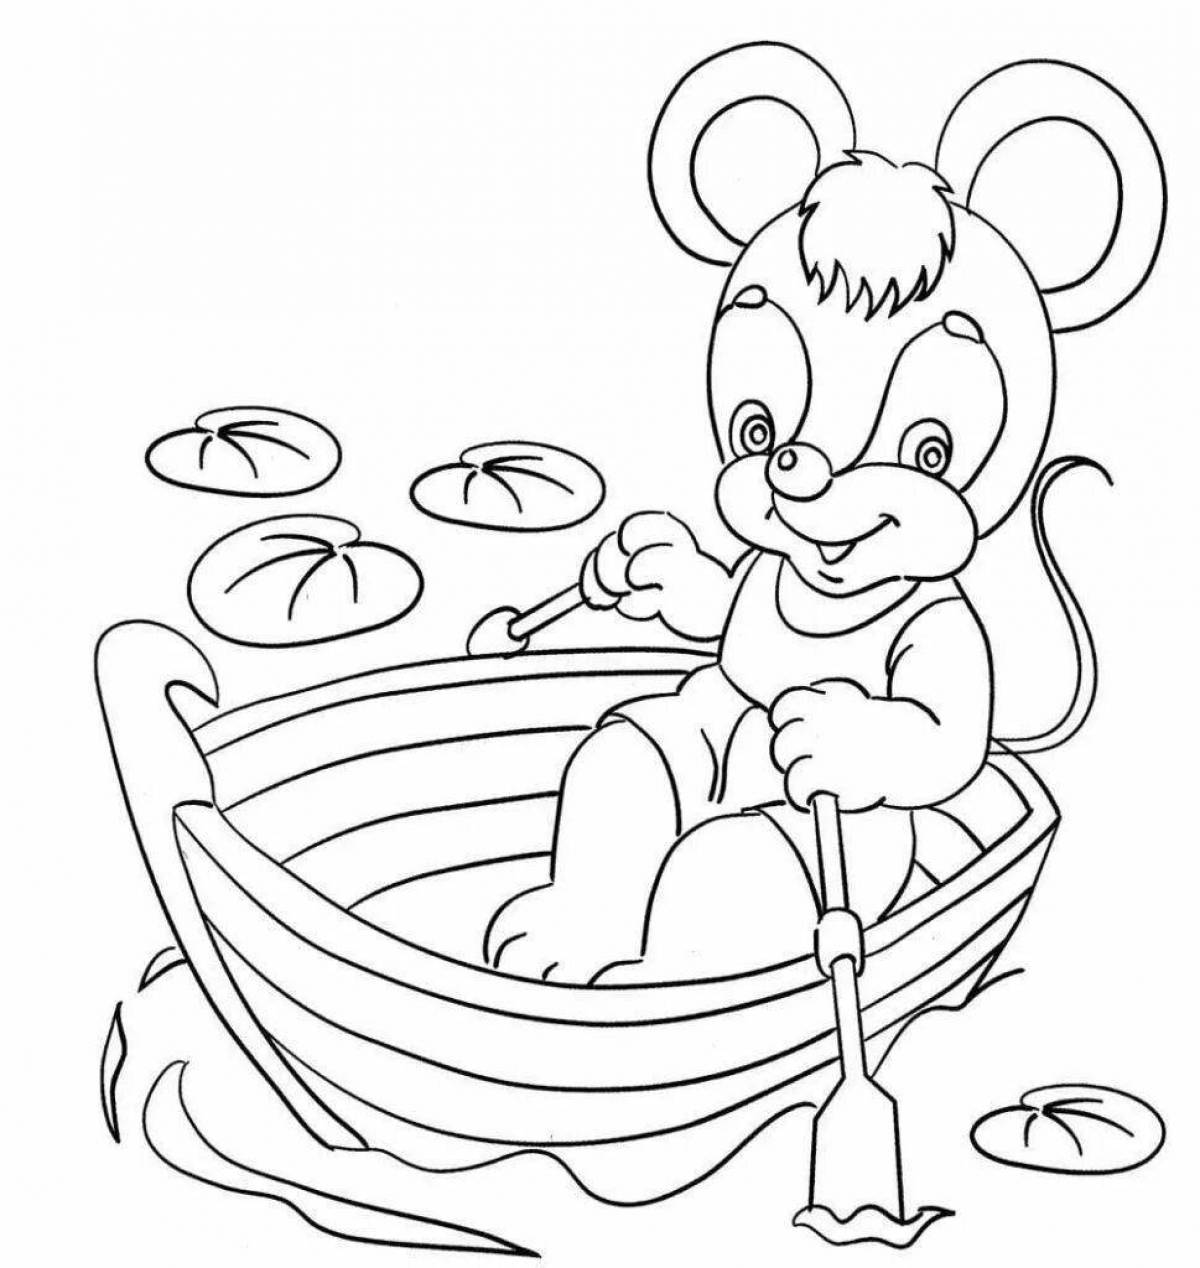 Fun coloring for children 4-5 years old in the nursery